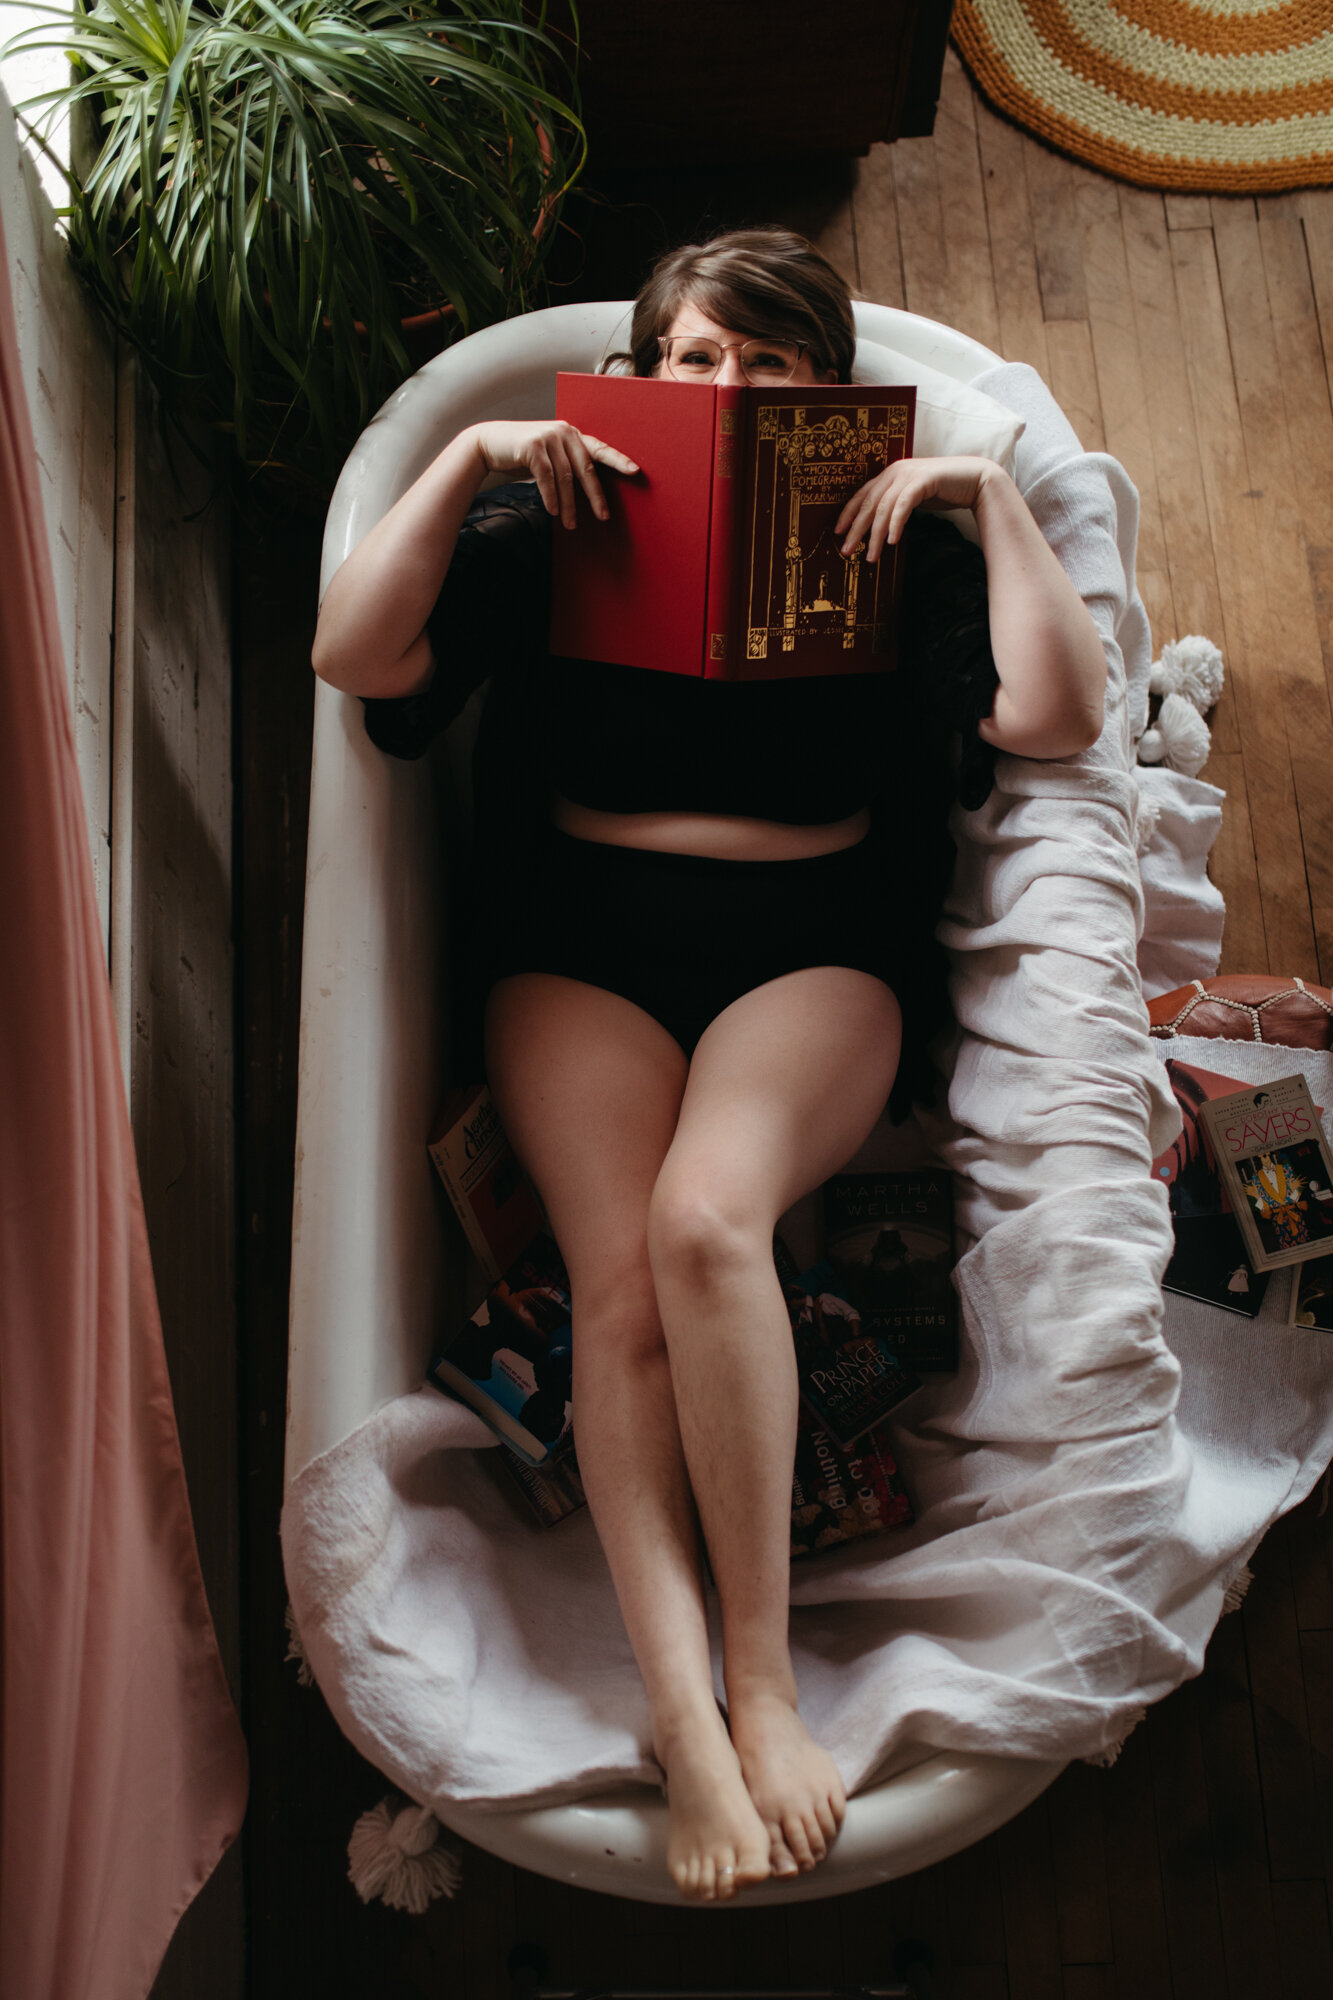 Fun boudoir portrait of person in bathtub holding book over bottom half of face